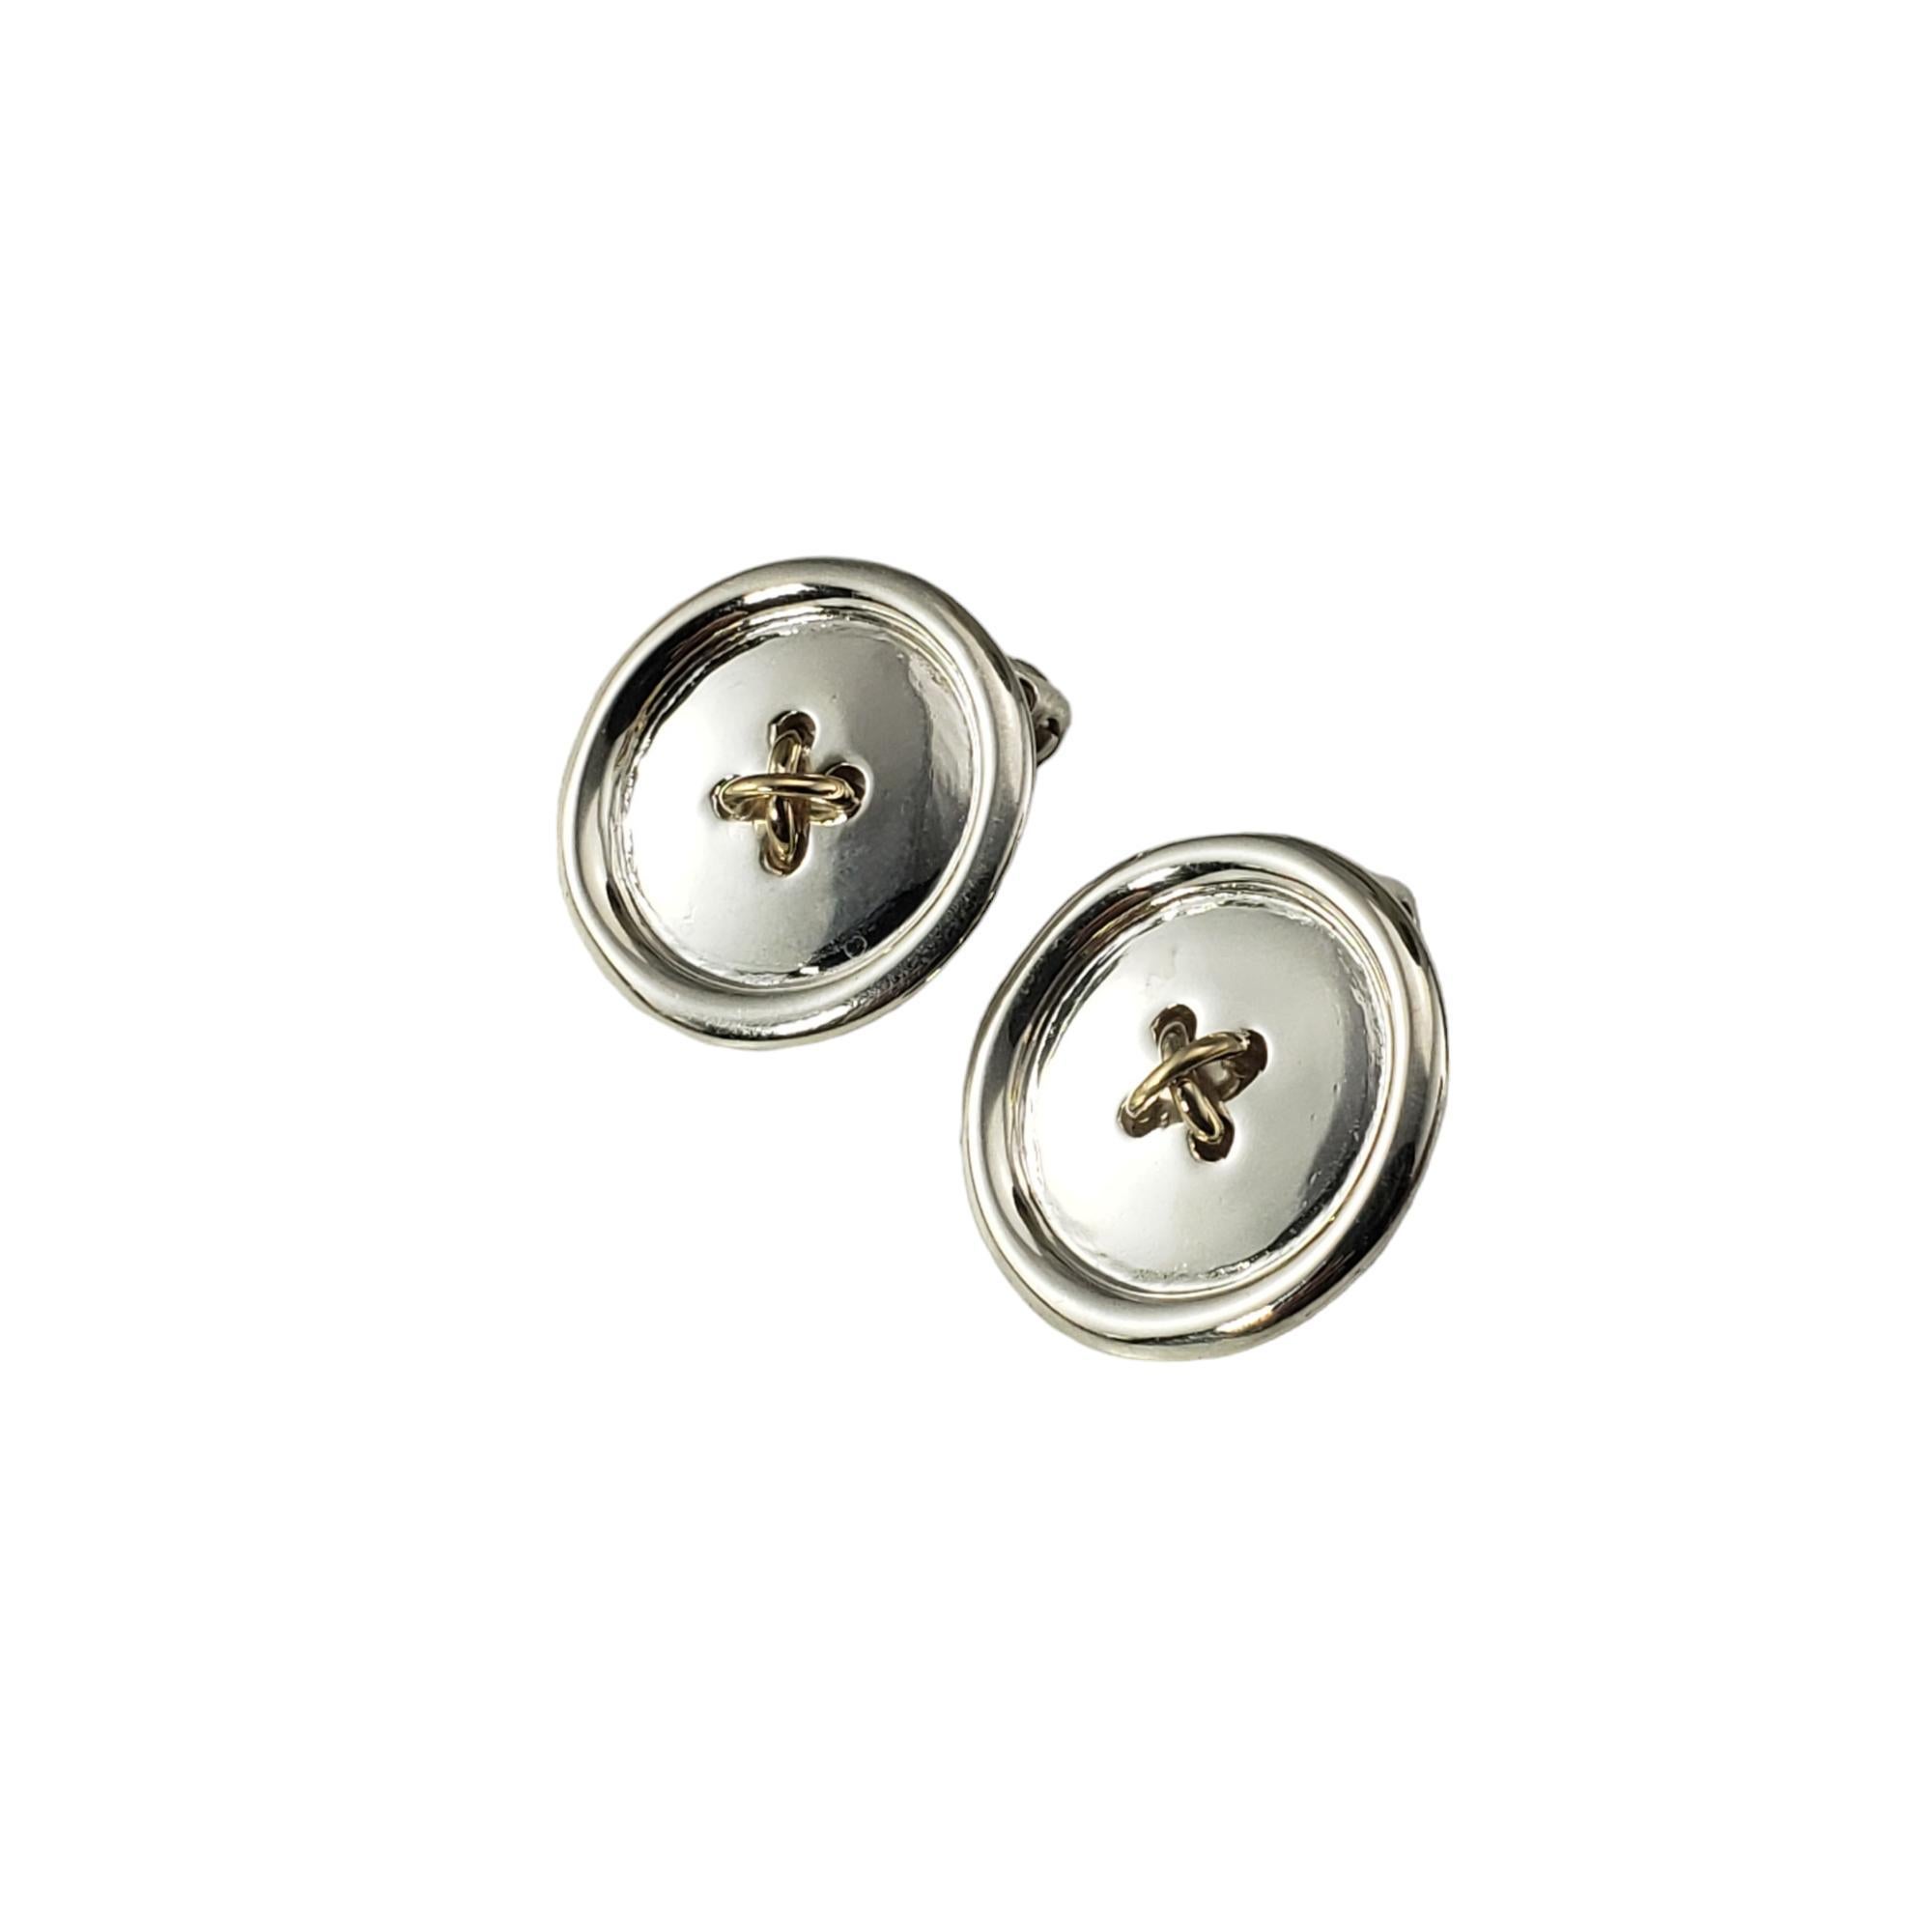 Vintage Tiffany & Co. Sterling Silver and 14K Yellow Gold Button Clip On Earrings-

These button earrings by Tiffany & Co. are crafted in sterling silver and accented with 14K yellow gold.  Clip on closures.

Size: 18 mm

Hallmark:  TIFFANY & CO. 14